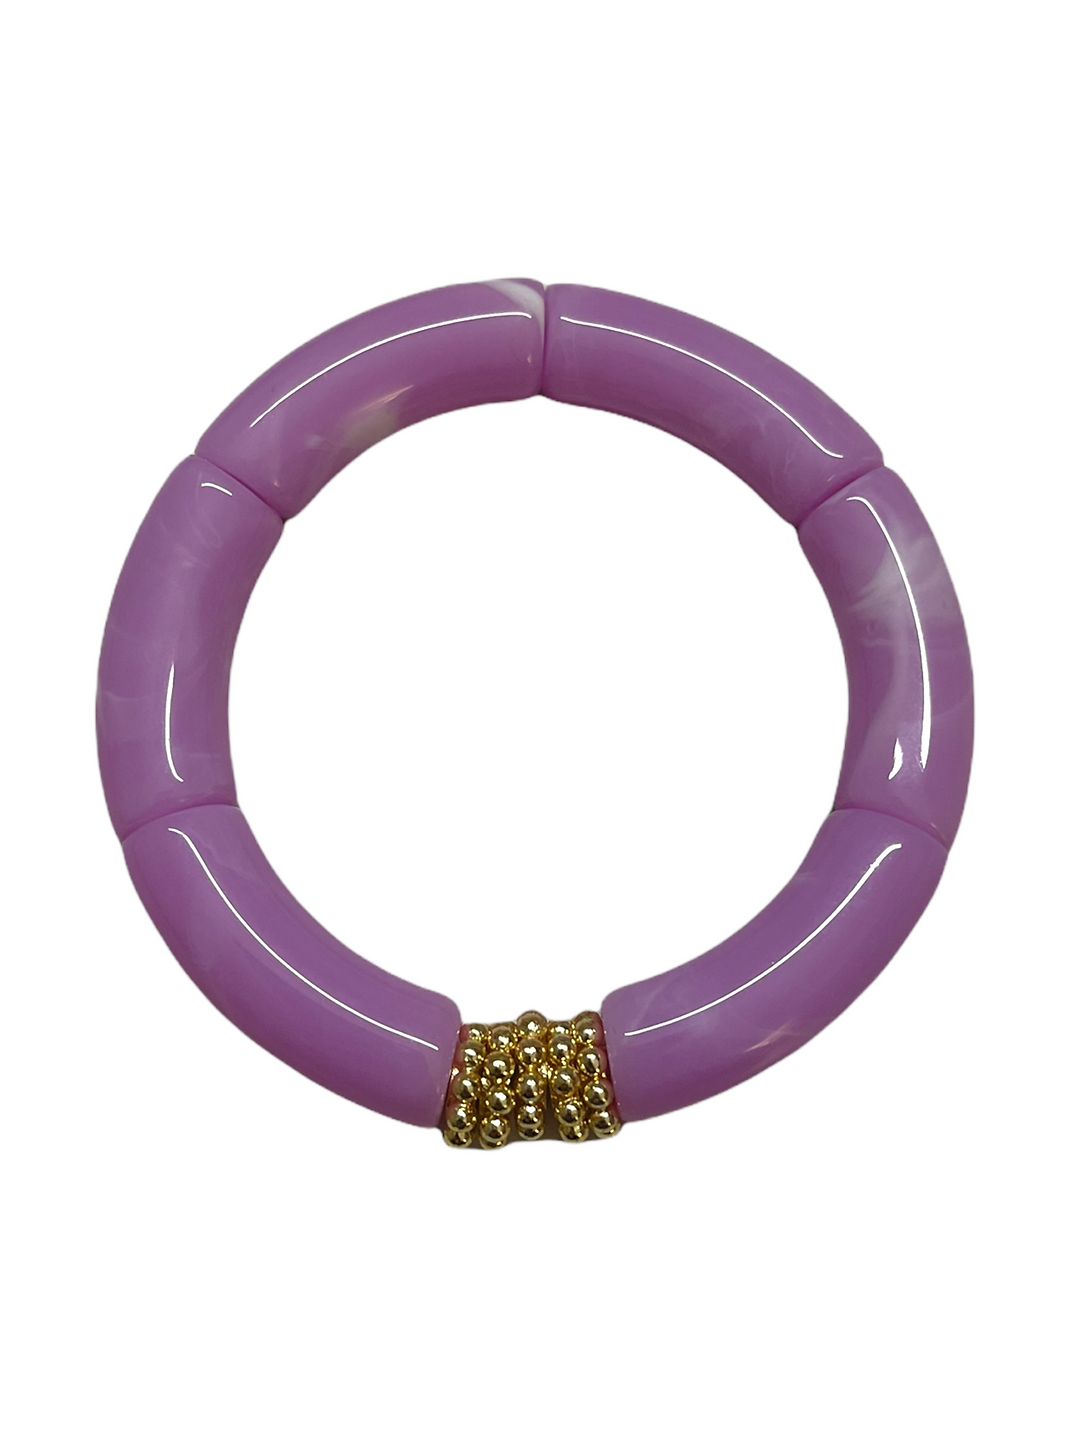 Circle bracelet made up of cylindrical  lavender marble with gold beaded accent piece. 